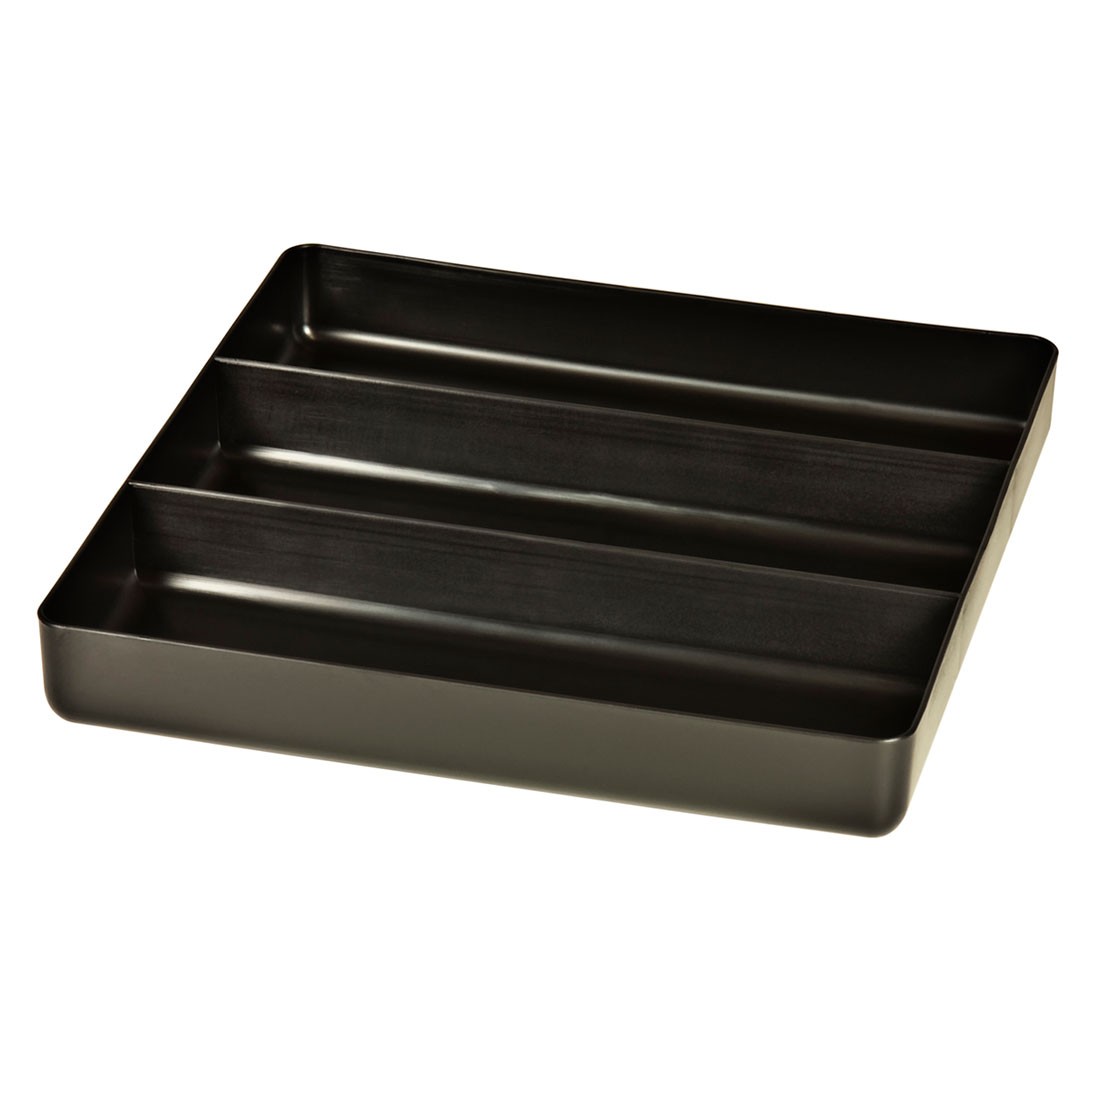 http://www.ernstmfg.com/Shared/Images/Product/5021-Three-Compartment-Organizer-Tray-Black/5021_three-compartment-organizer-tray_black-1100_1.jpg